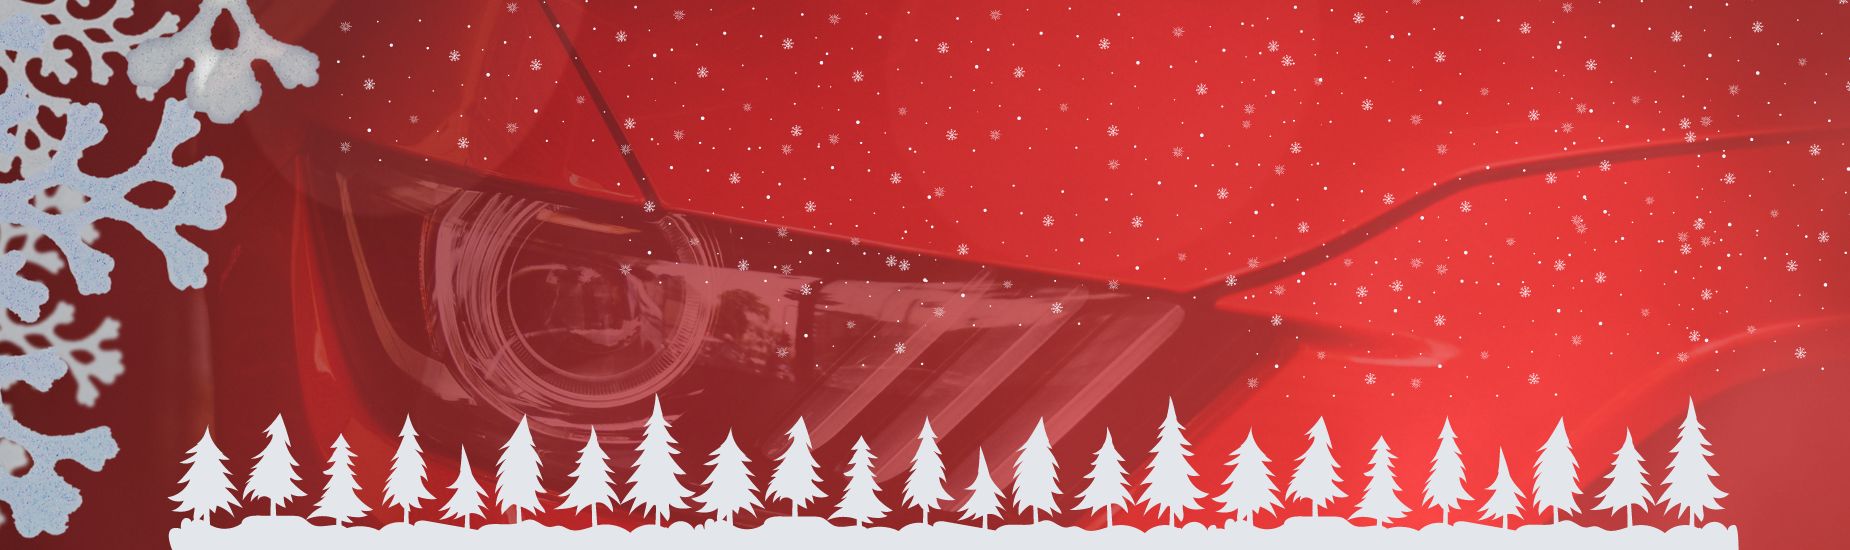 Snow covered pine trees landscape with a red car background